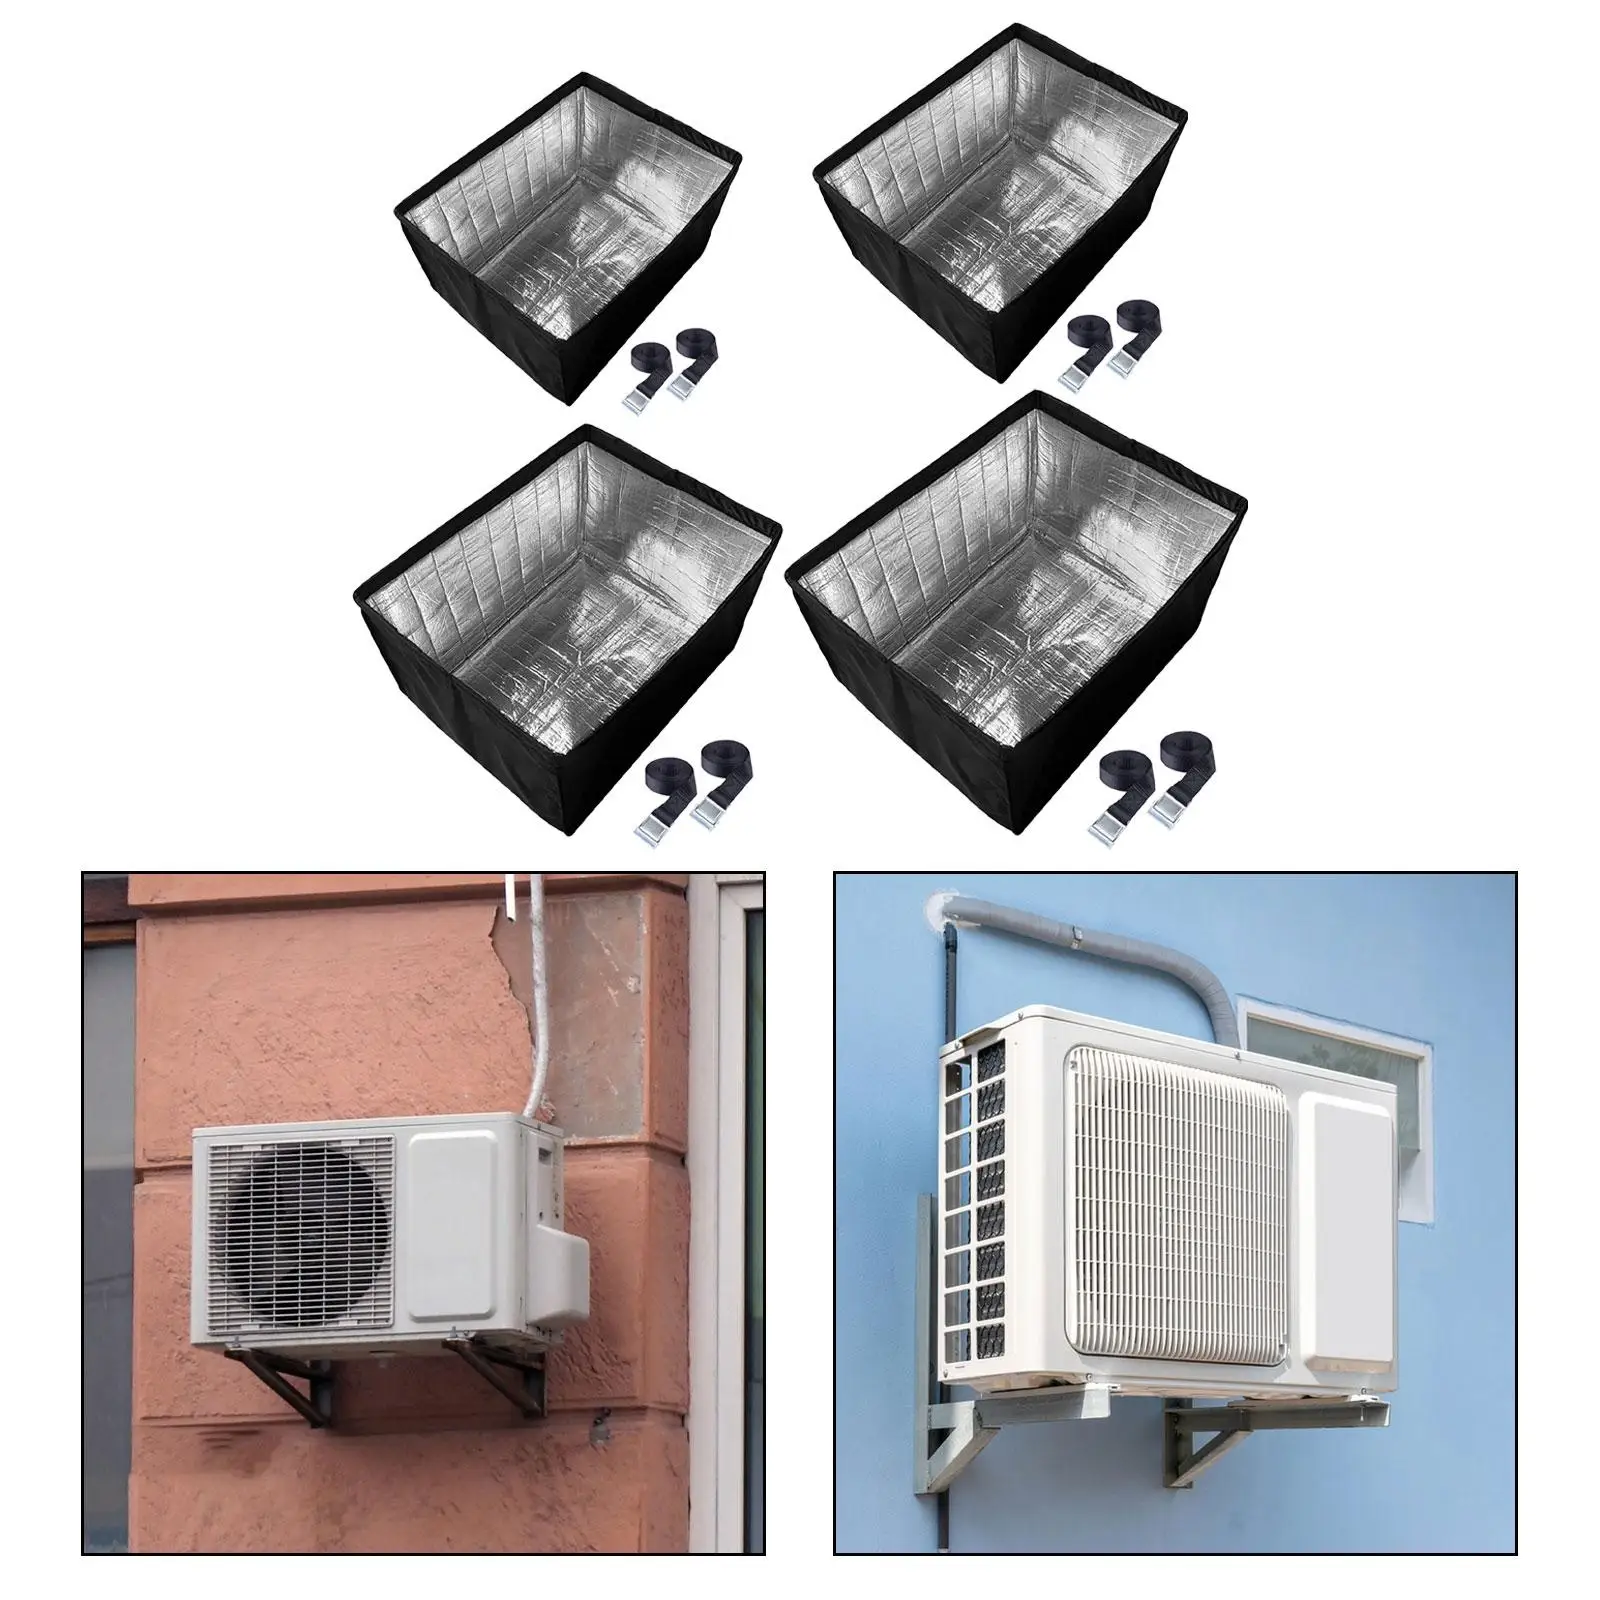 Air Conditioner Cover for Outside Units Keep Warm for School,Home Window